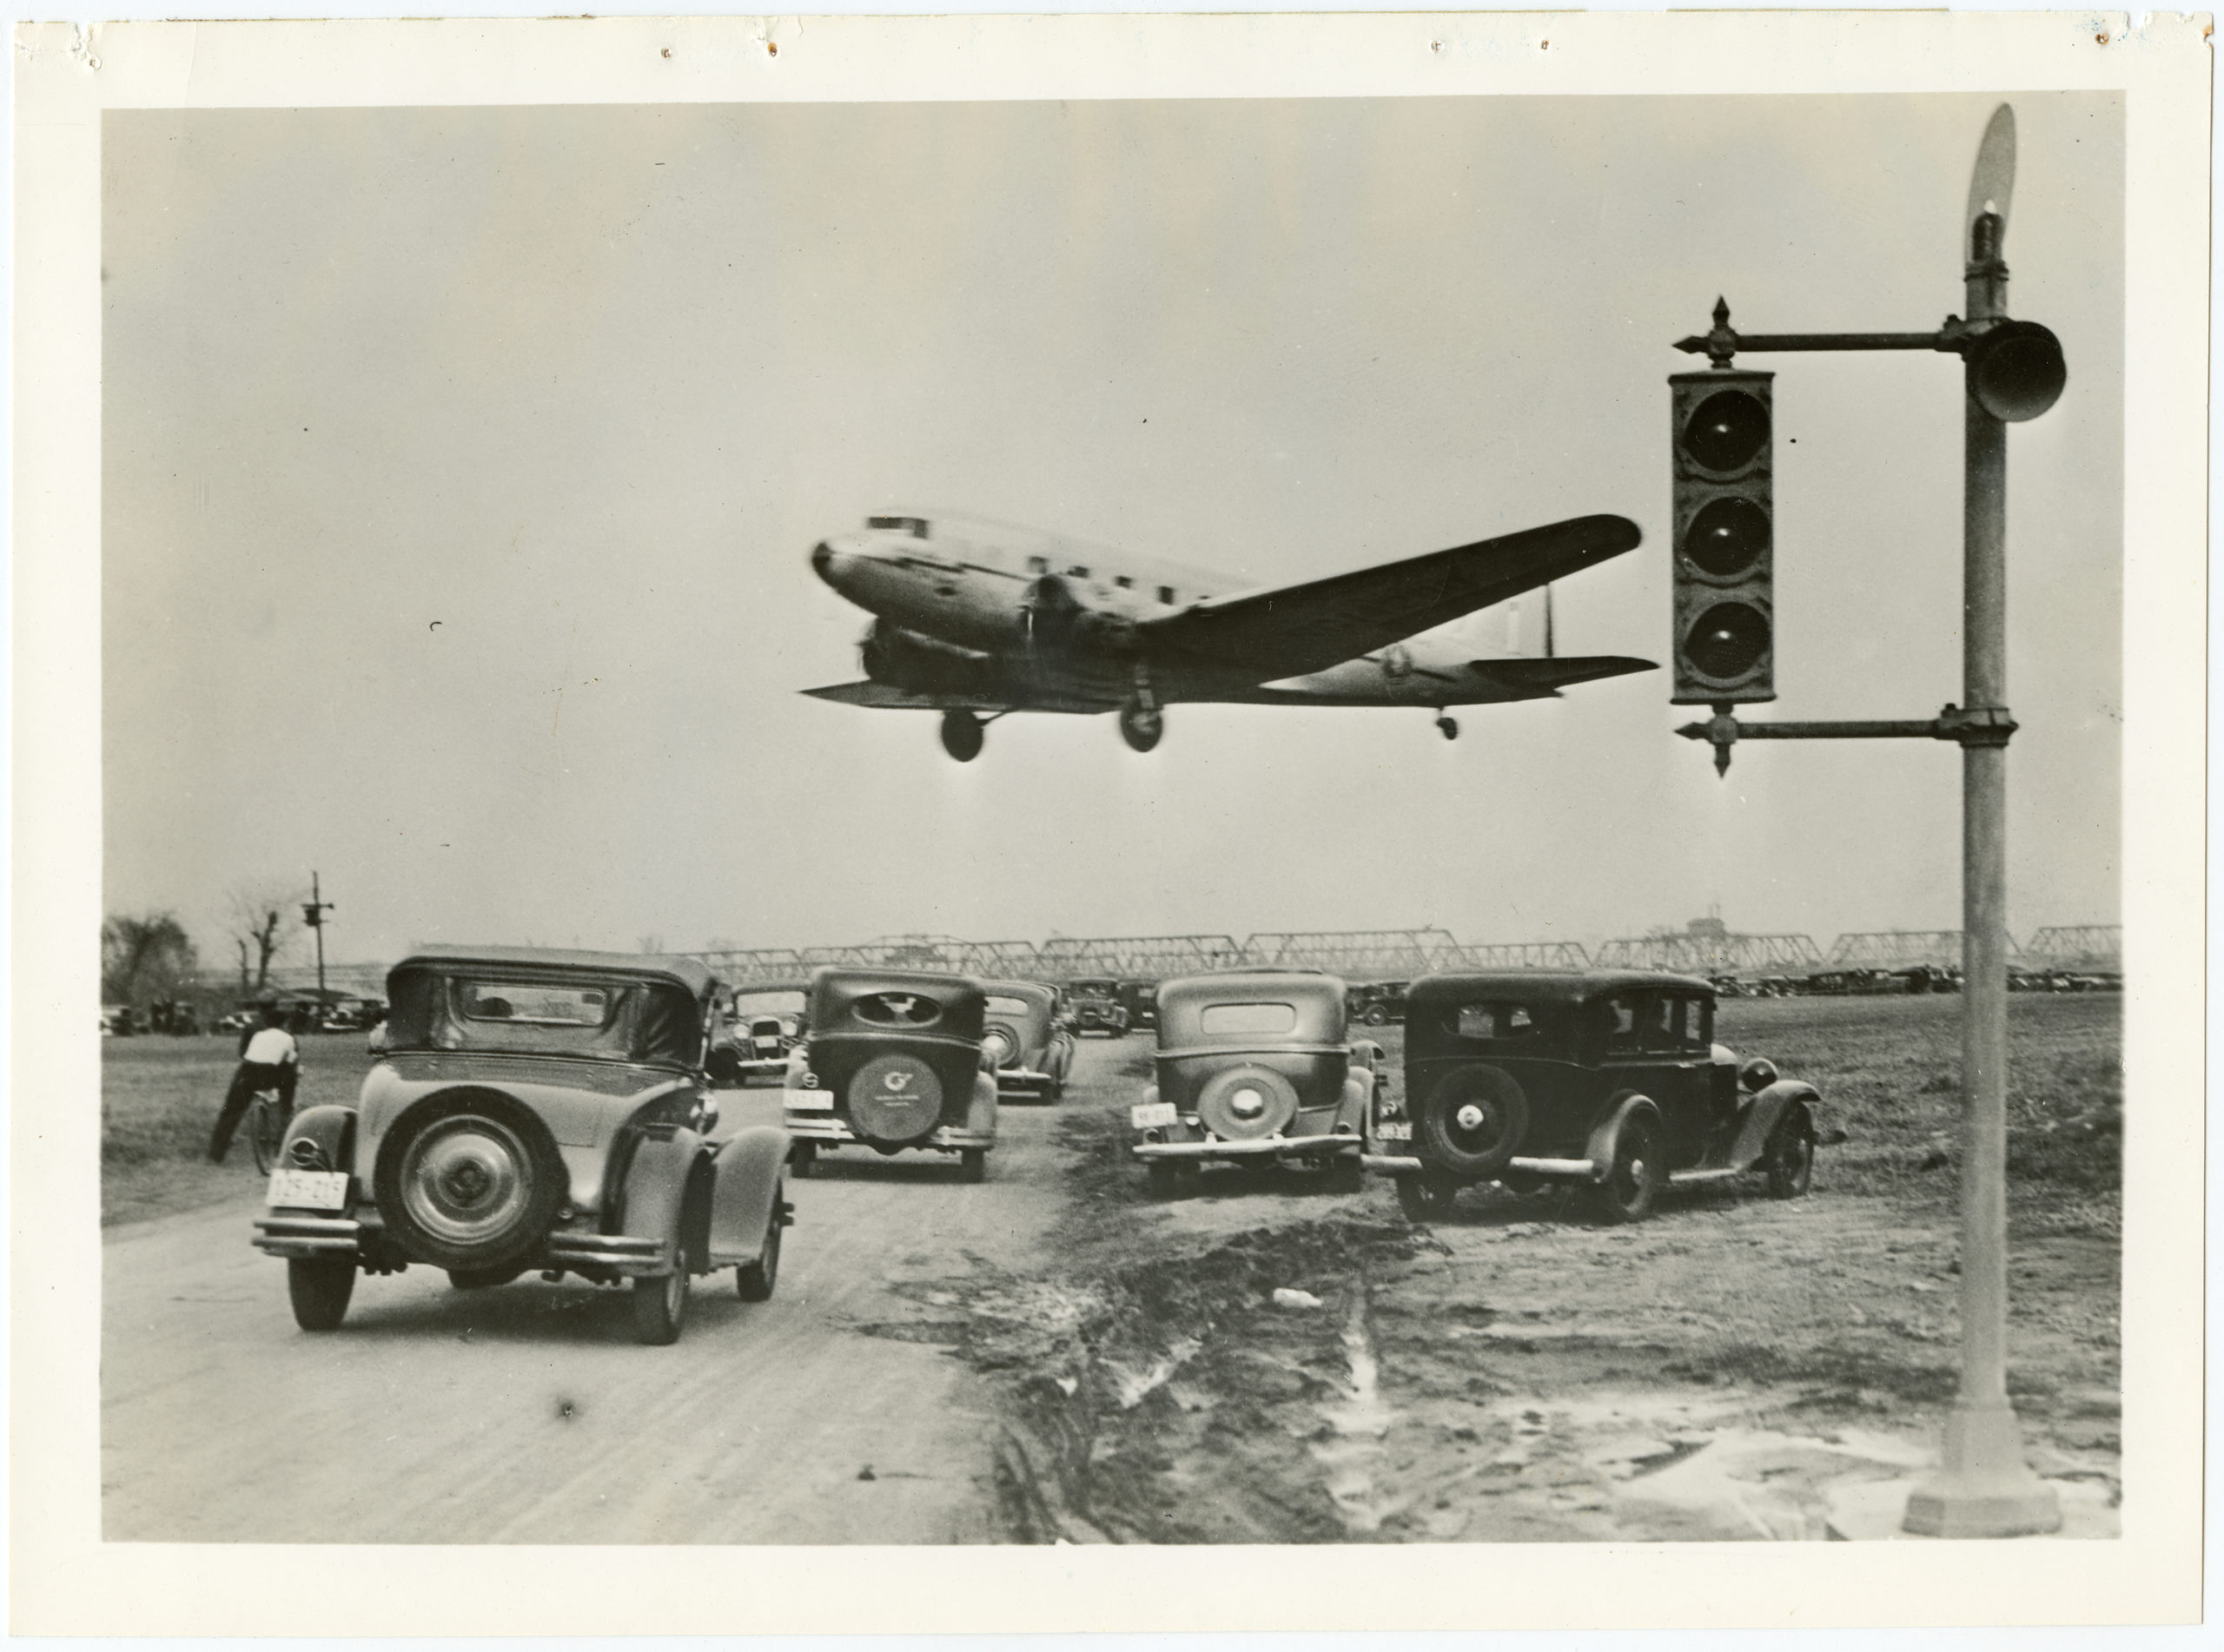 A passenger plane flying low over several cars. 1930, 1 print, b&amp;w, 7.5 x 10 in..